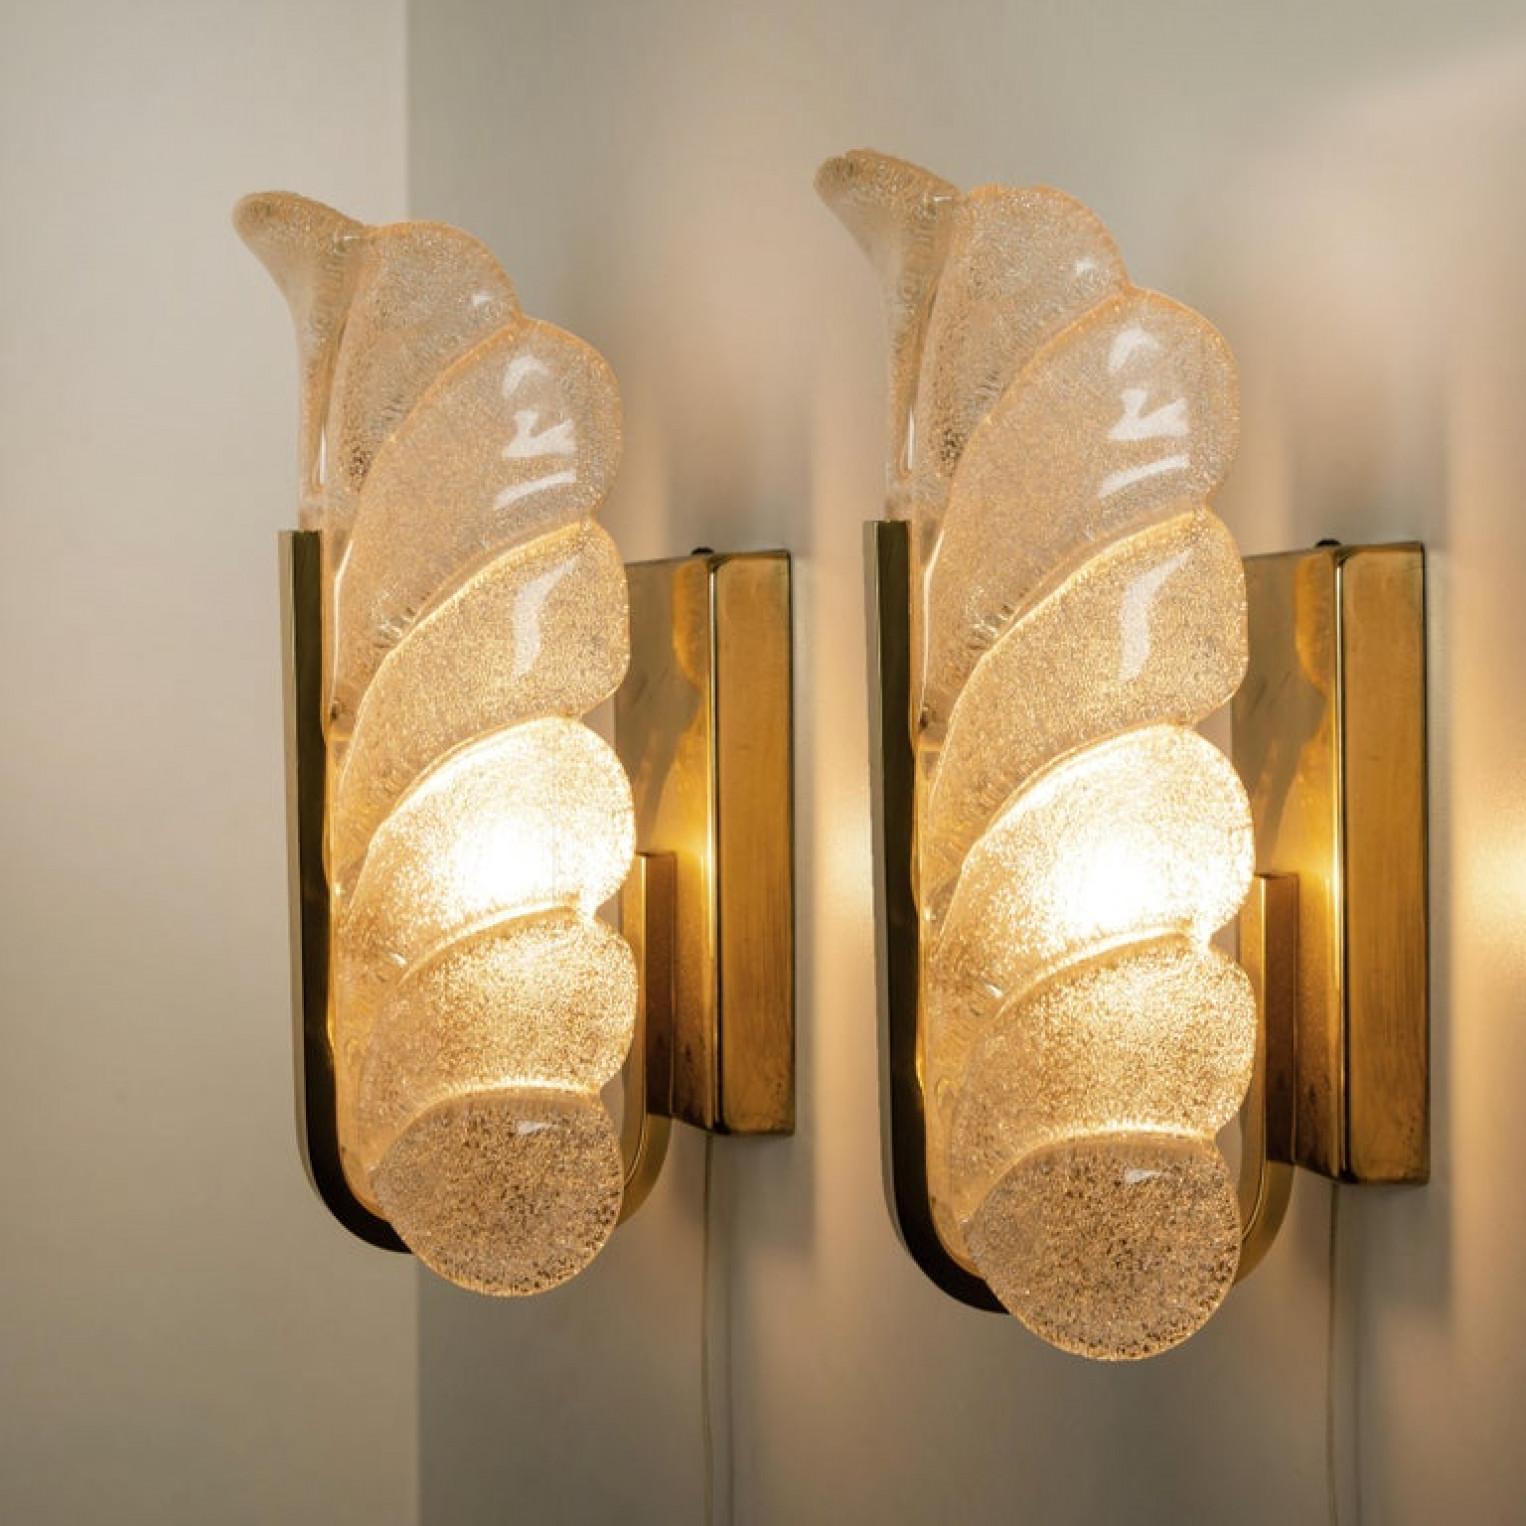 A beautiful large set of high end wall lights with one glass shade and brass frame. The light fixtures are produced in the 1960s by the iconic firm of Orrefors and designed by Carl Fagerlund.

Beautifully carved clear frosted glass shades in a leaf